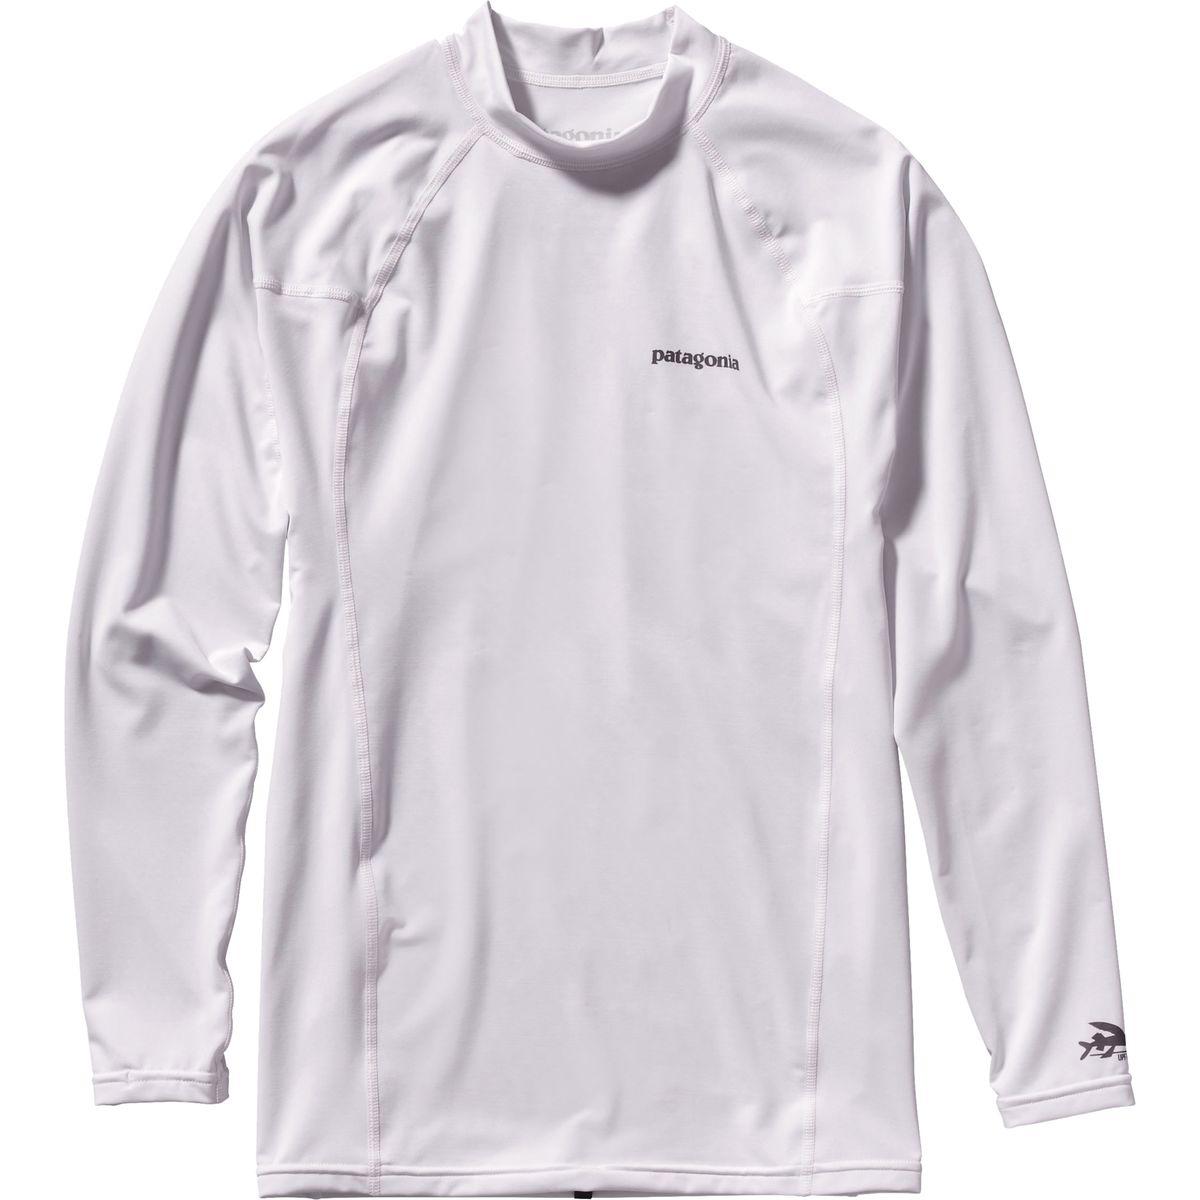 Patagonia Synthetic R0 Long-sleeve Rashguard in Gray for Men - Lyst